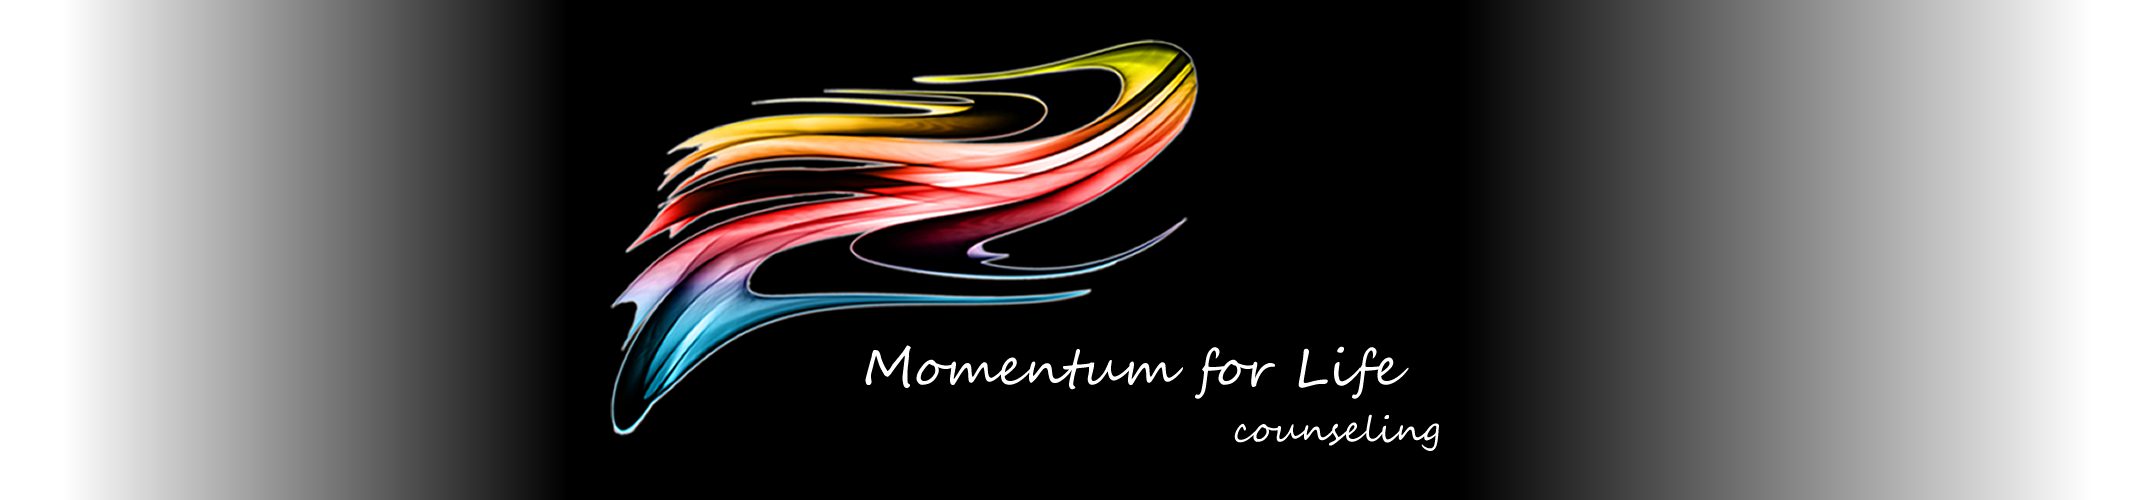 Momentum for Life Counseling